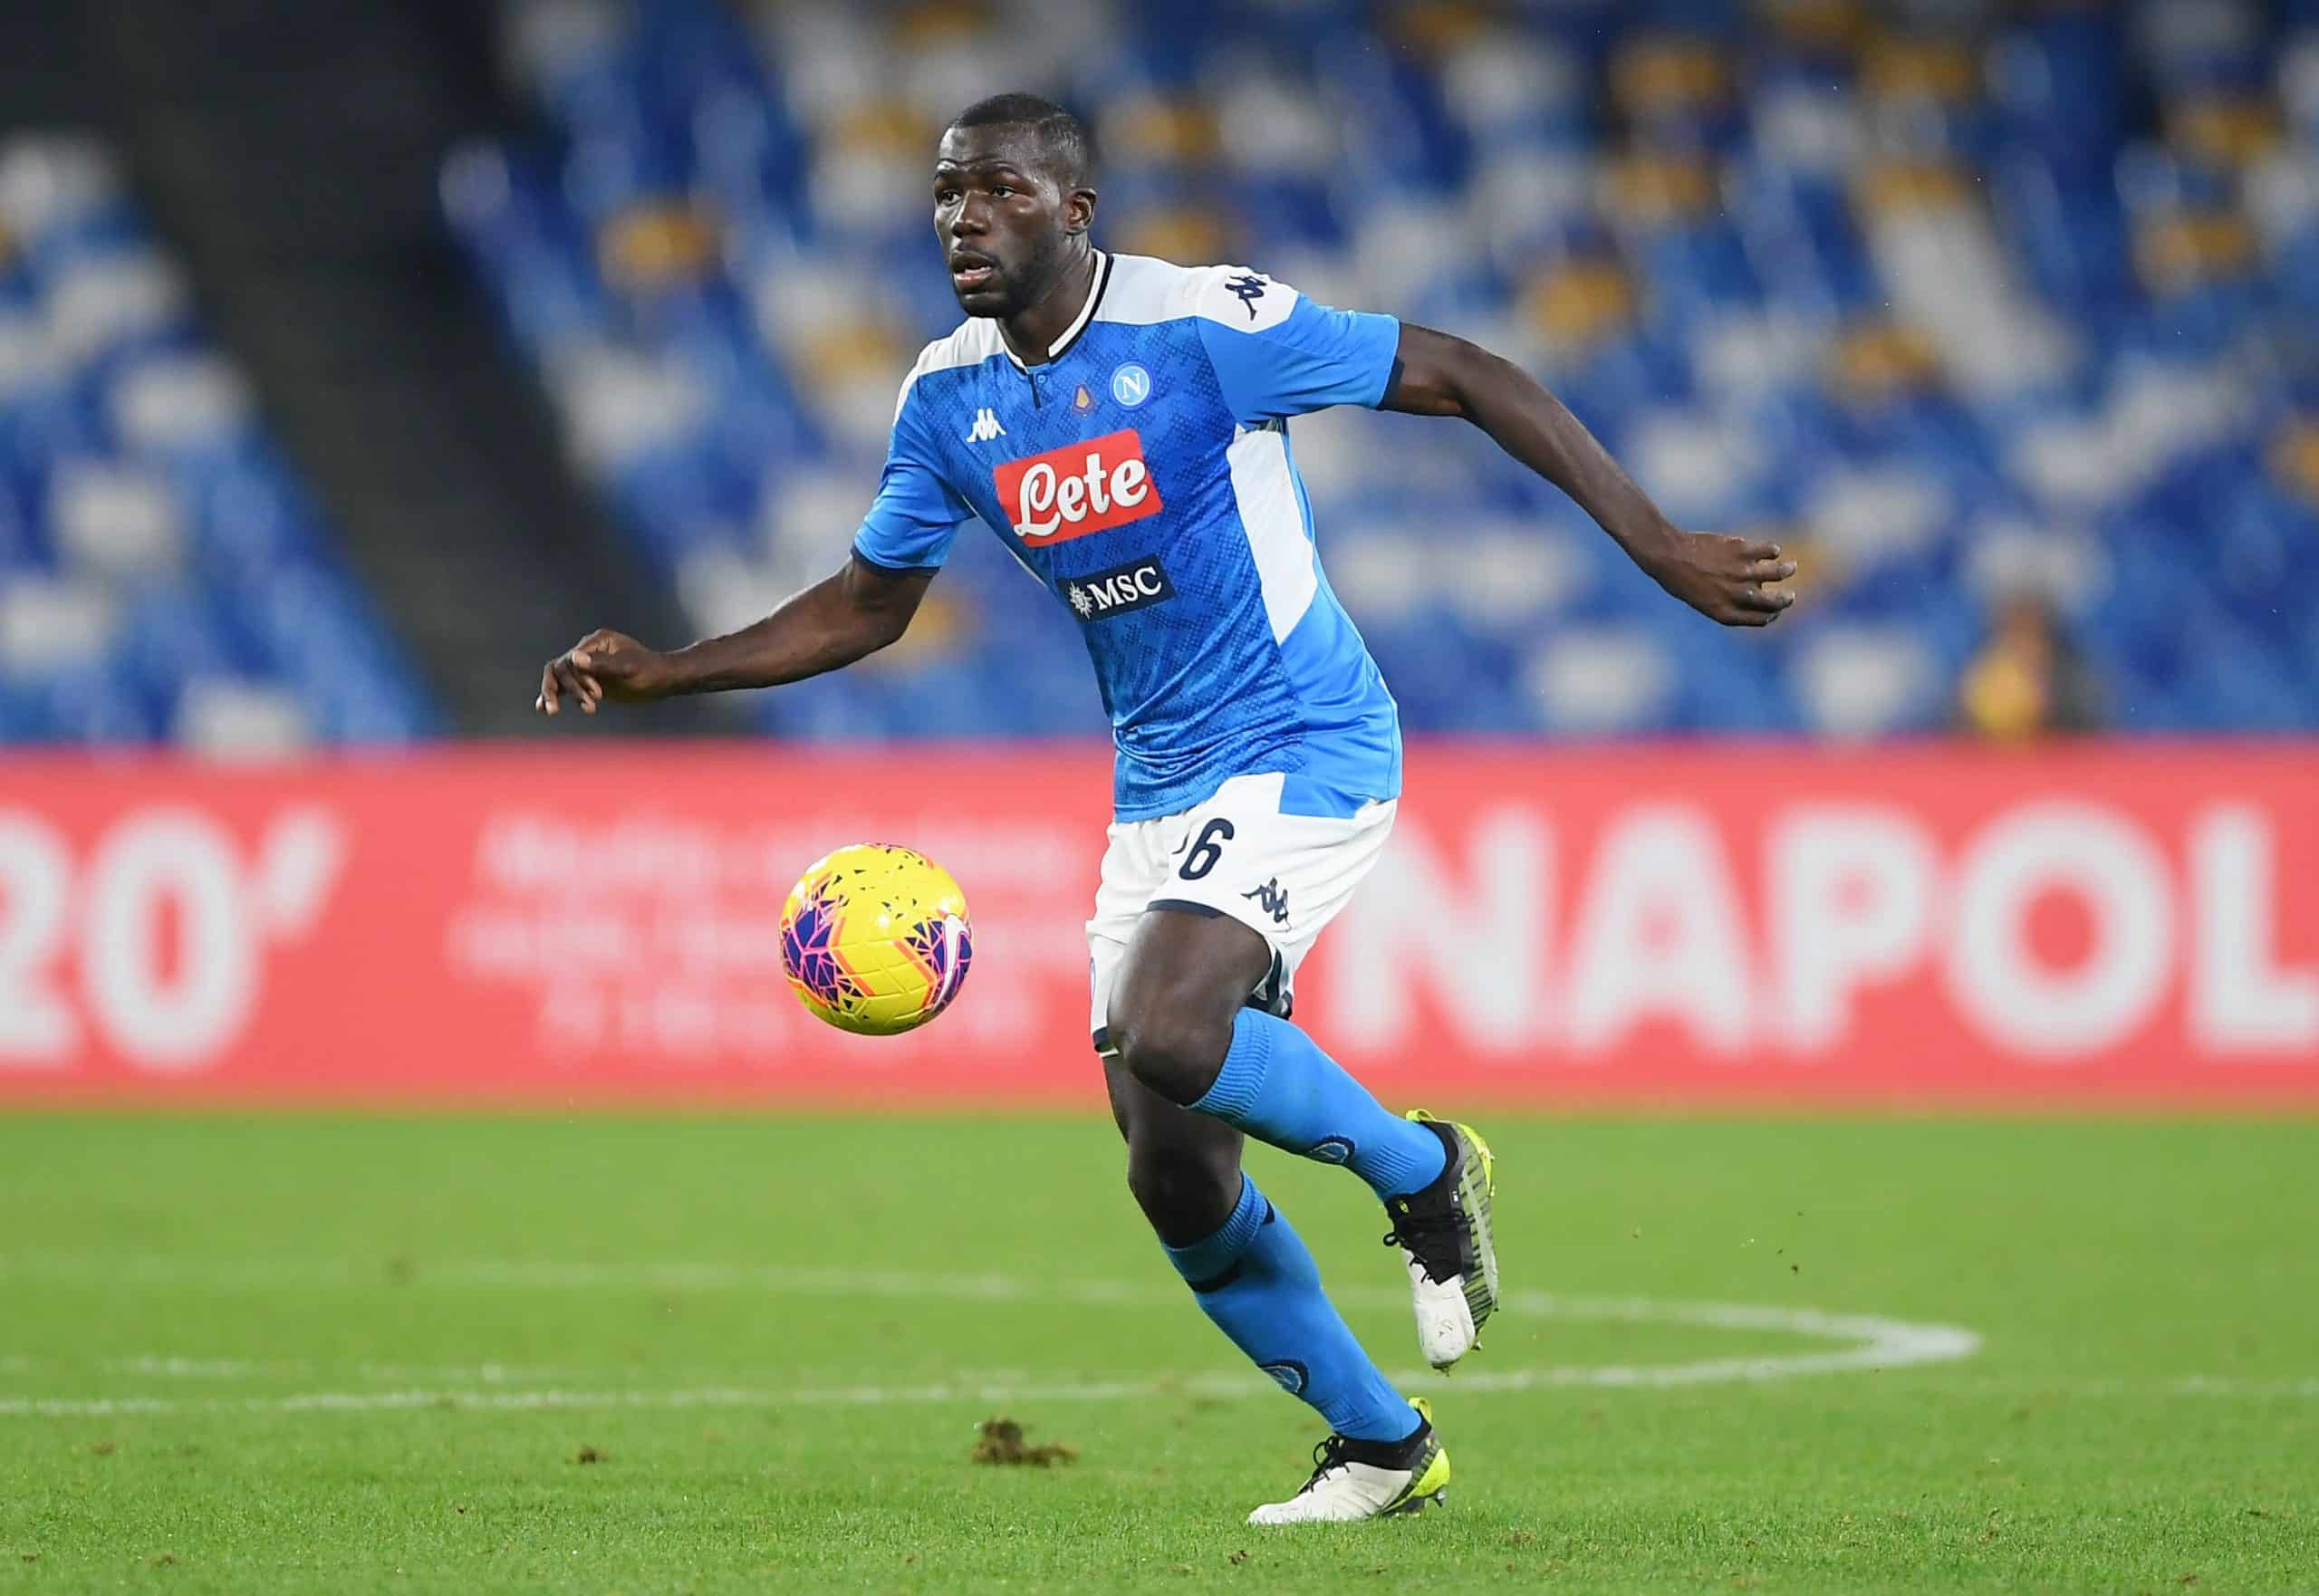 koulibaly scaled Kalidou Koulibaly is set to join Manchester City